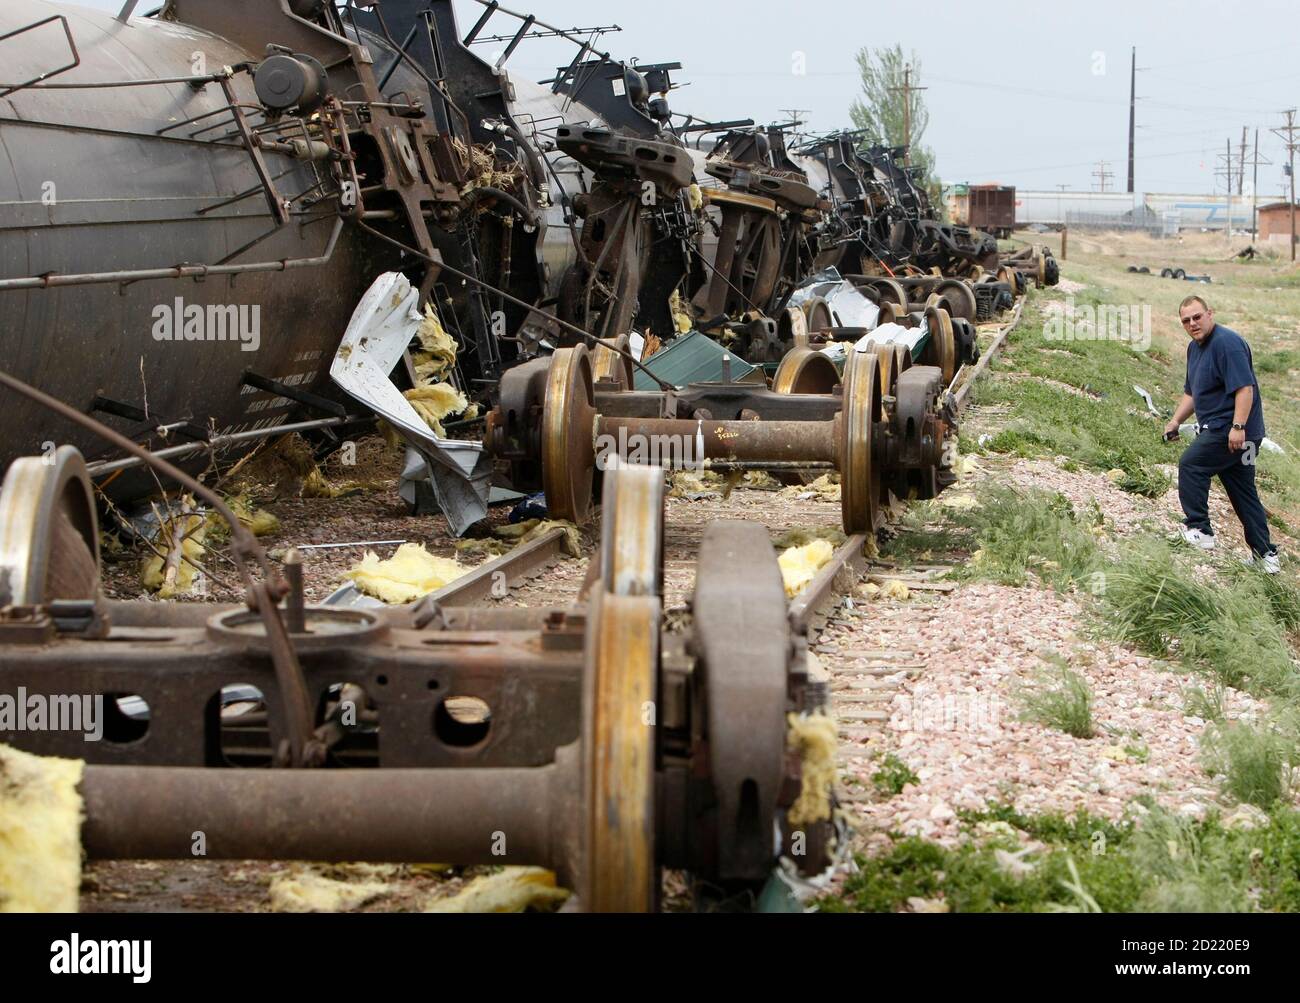 Curtis McFarlane looks at a tanker train blown off its wheels by a tornado in Windsor, Colorado May 22, 2008. Several tornados touched down in the area around lunchtime.  REUTERS/Rick Wilking (UNITED STATES) Stock Photo